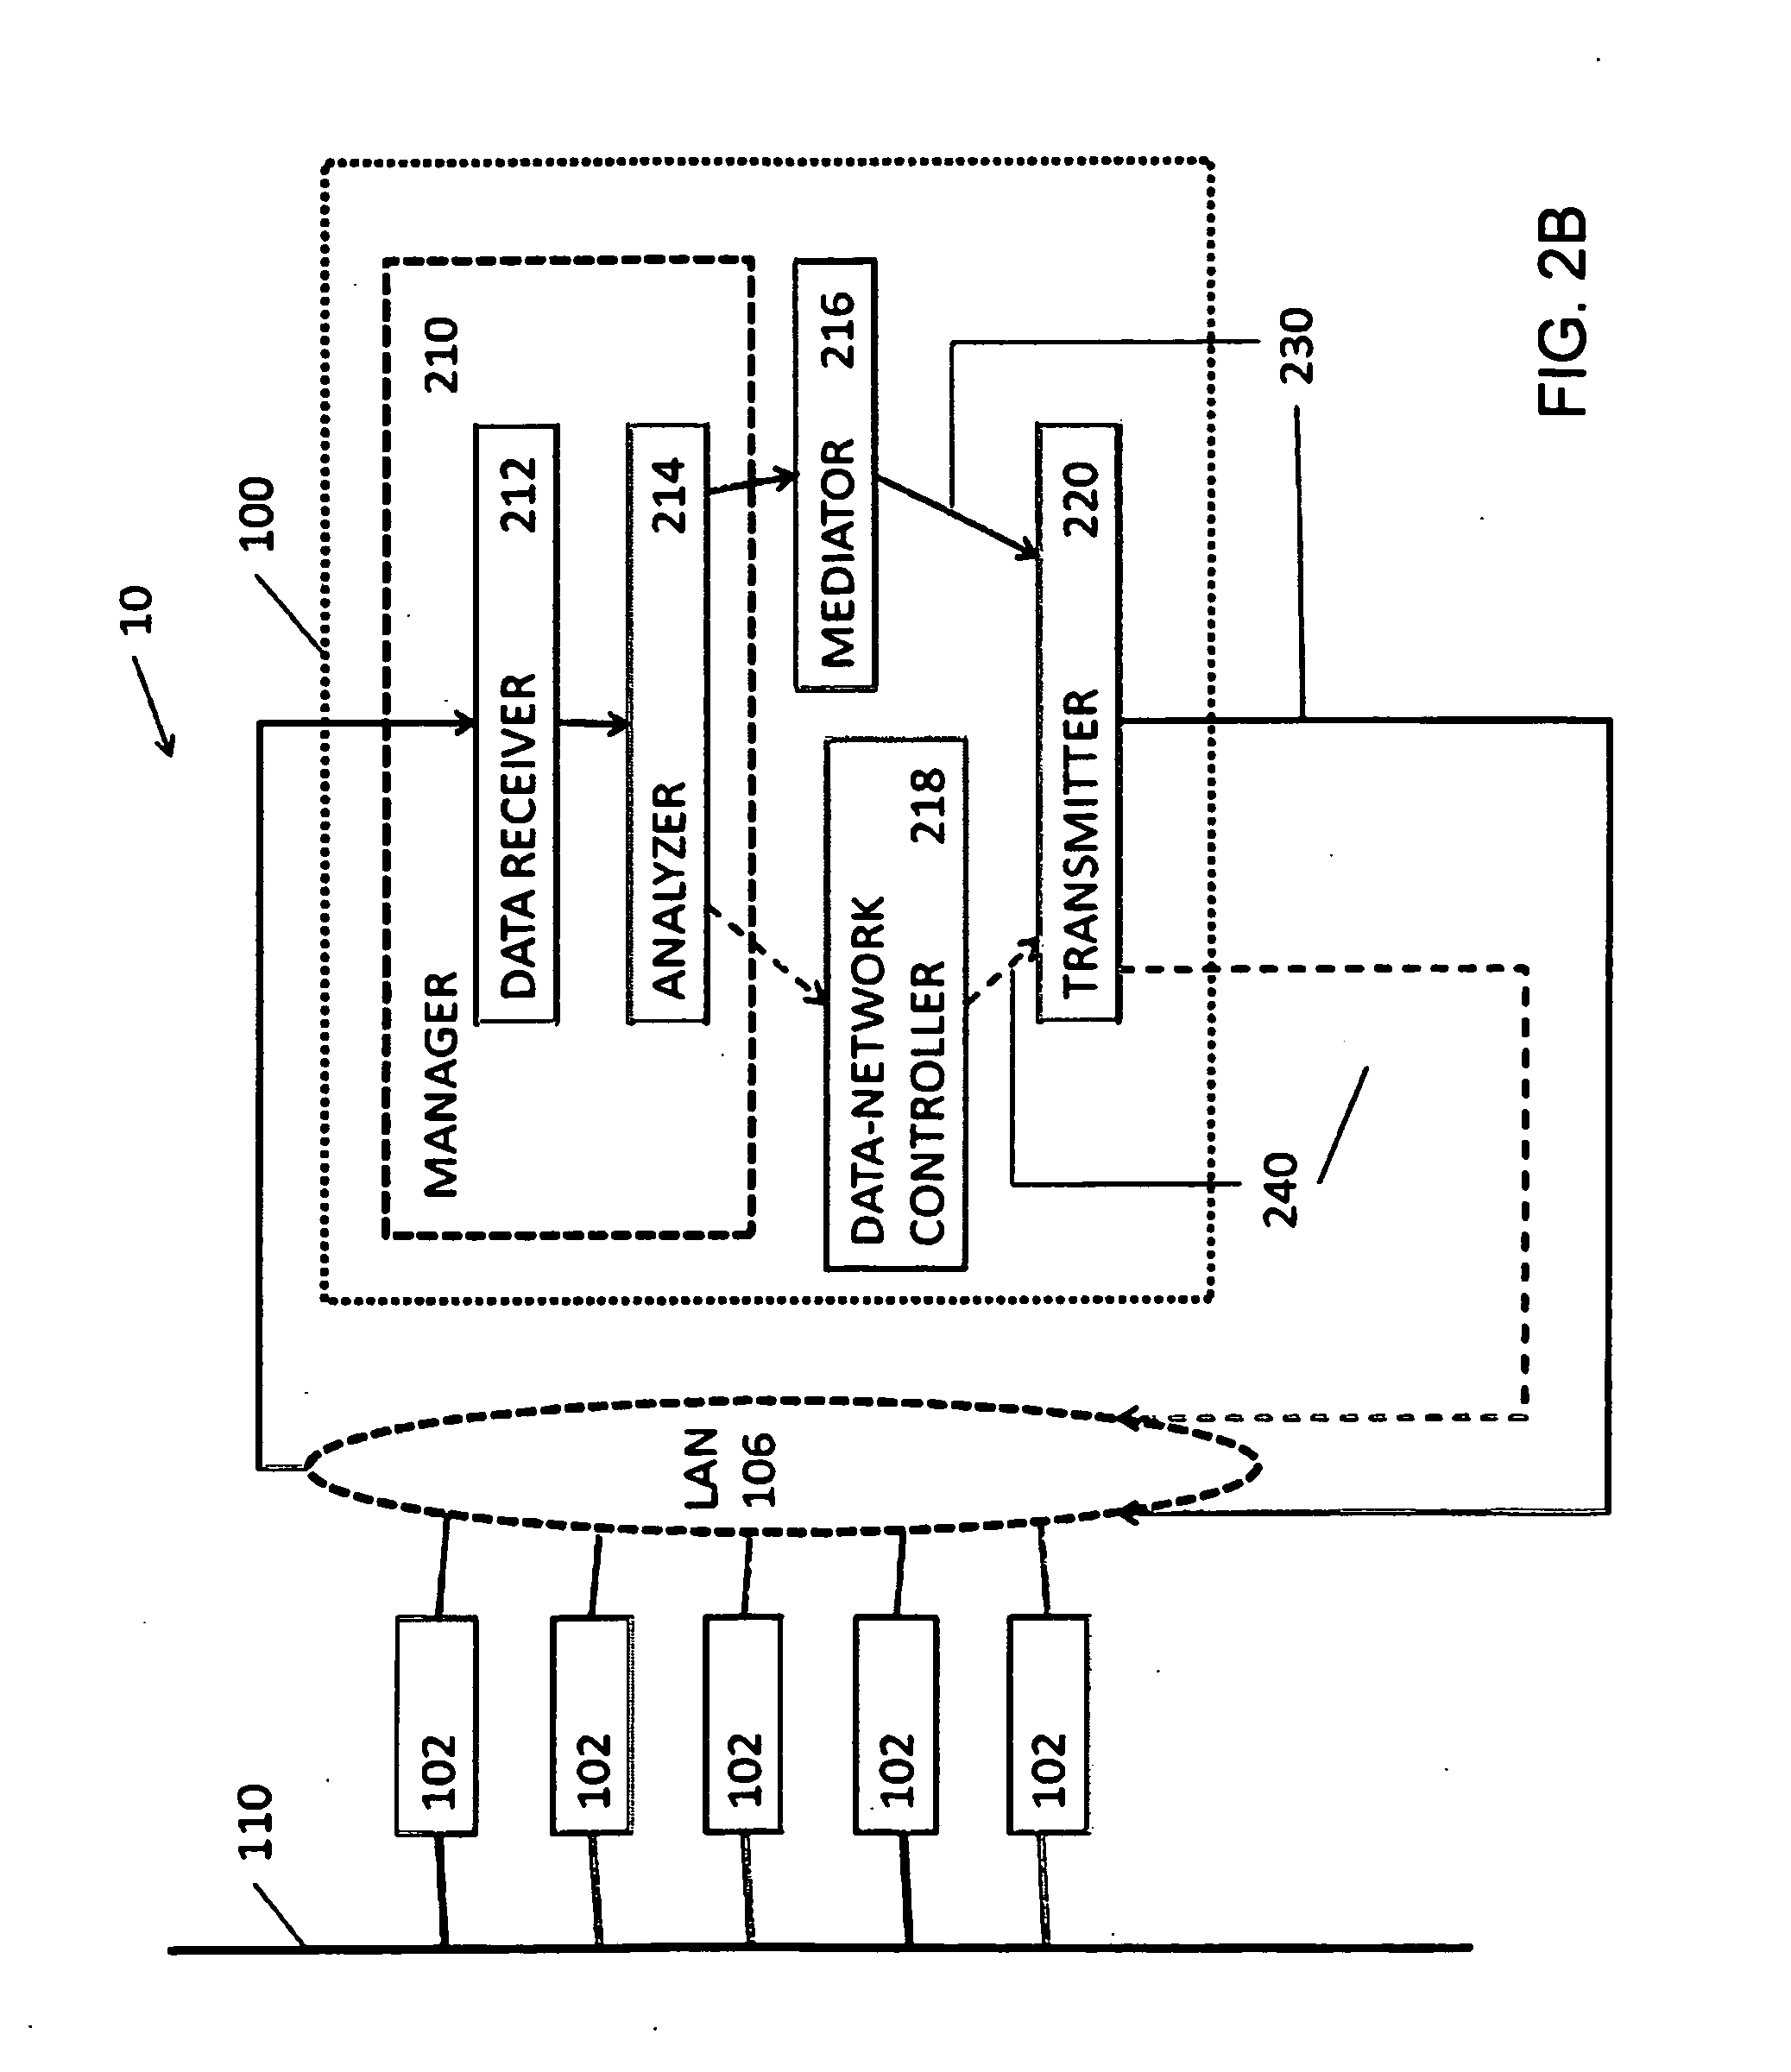 Communication system and method for managing data transfer through a communication network